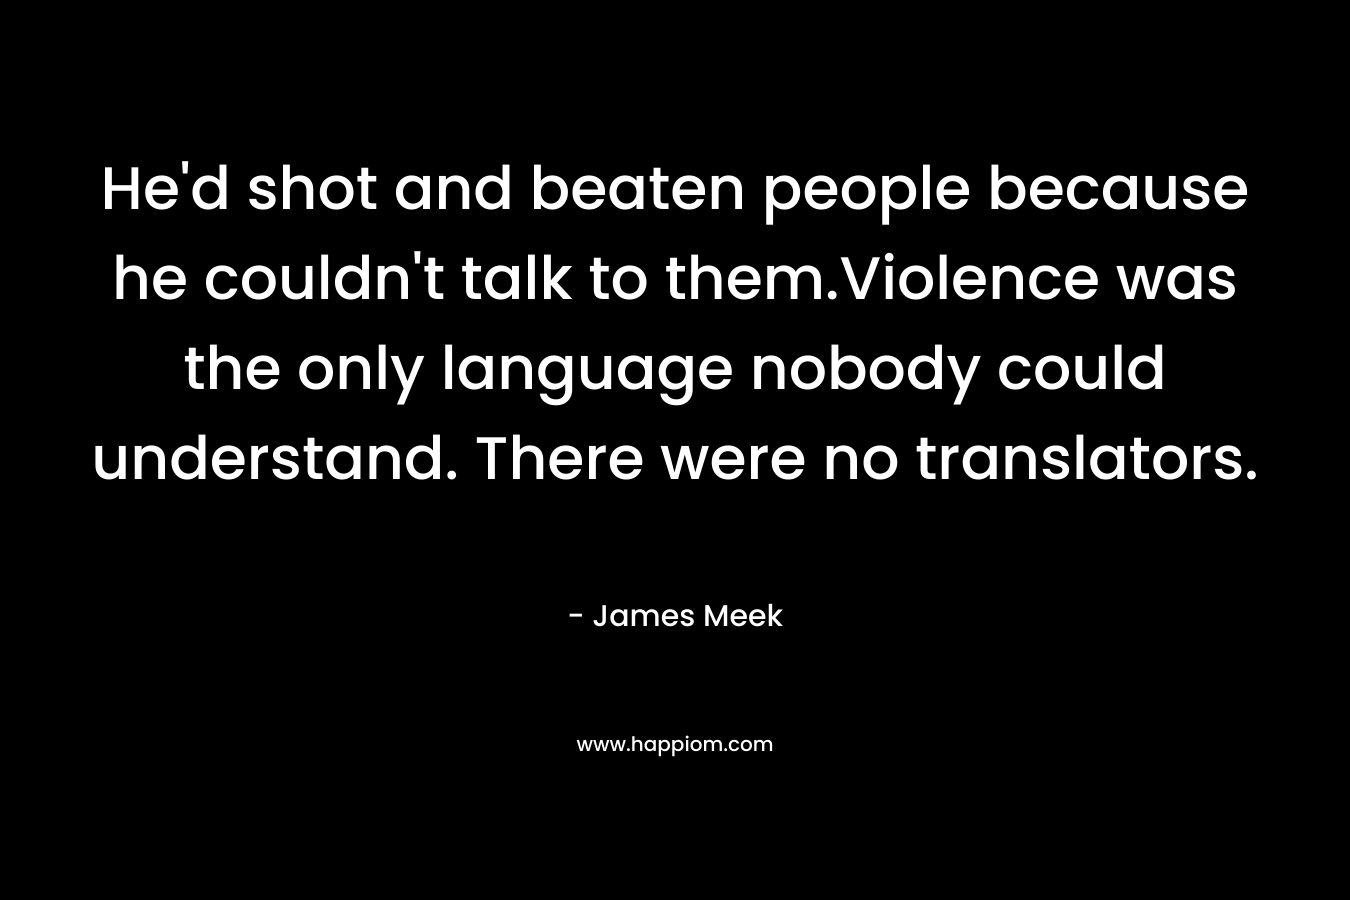 He’d shot and beaten people because he couldn’t talk to them.Violence was the only language nobody could understand. There were no translators. – James Meek